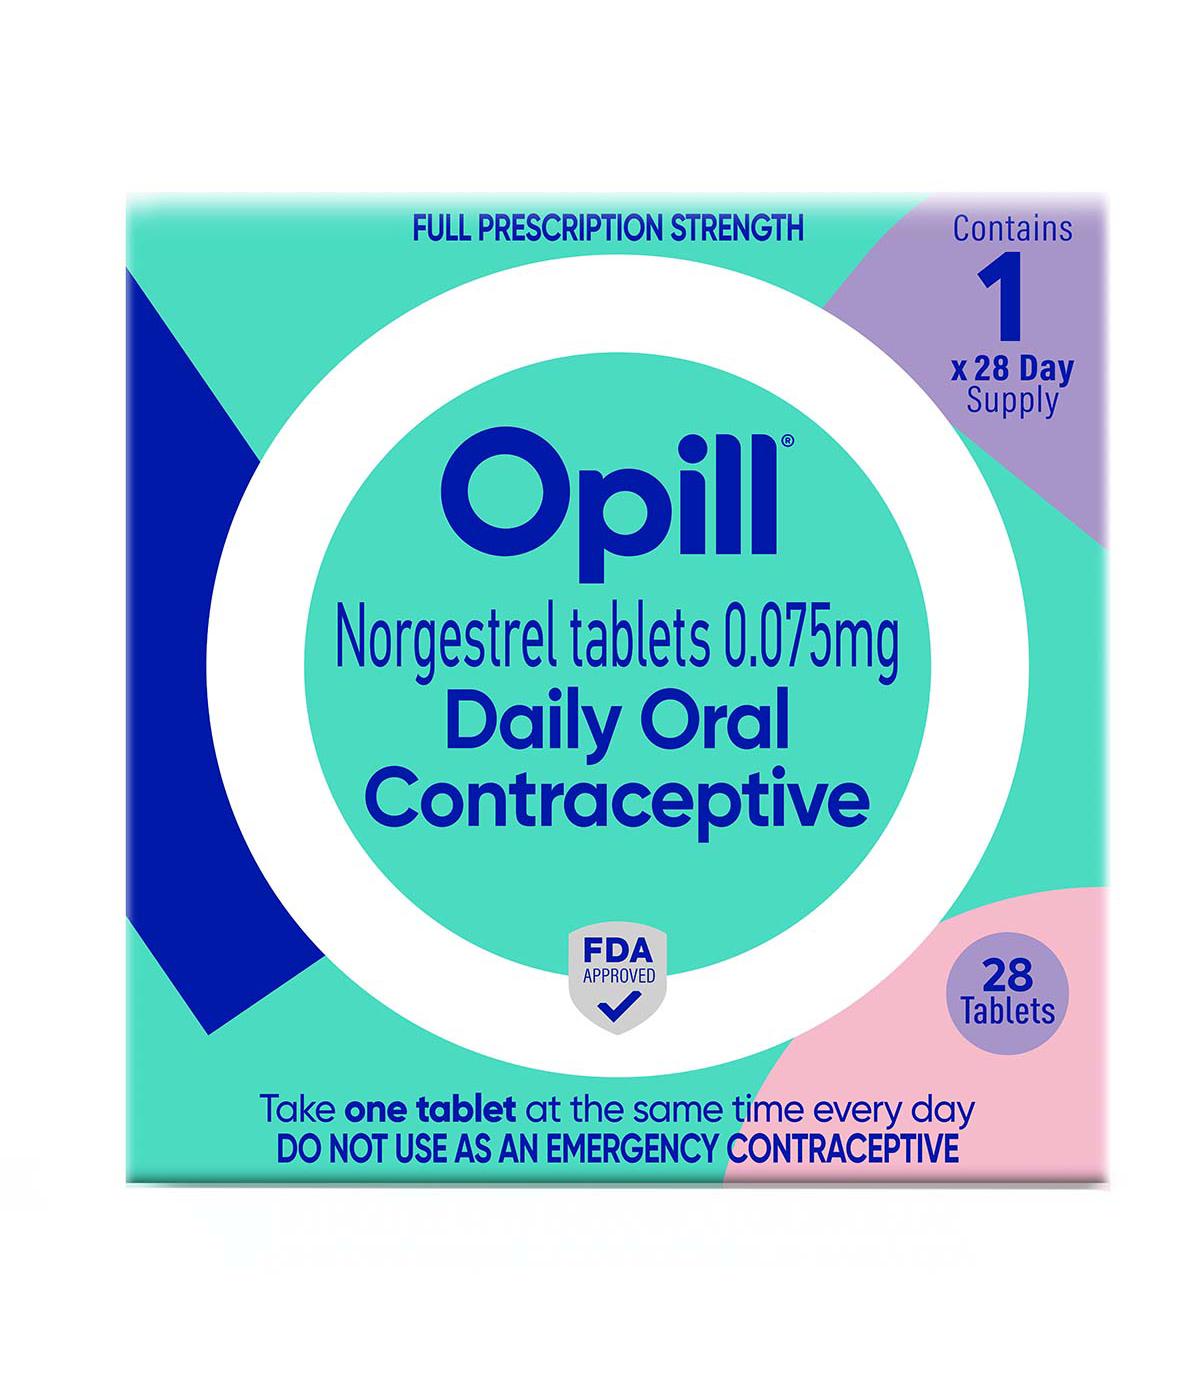 Opill Daily Oral Contraceptive Norgestrel Tablets - 0.075 mg; image 1 of 11